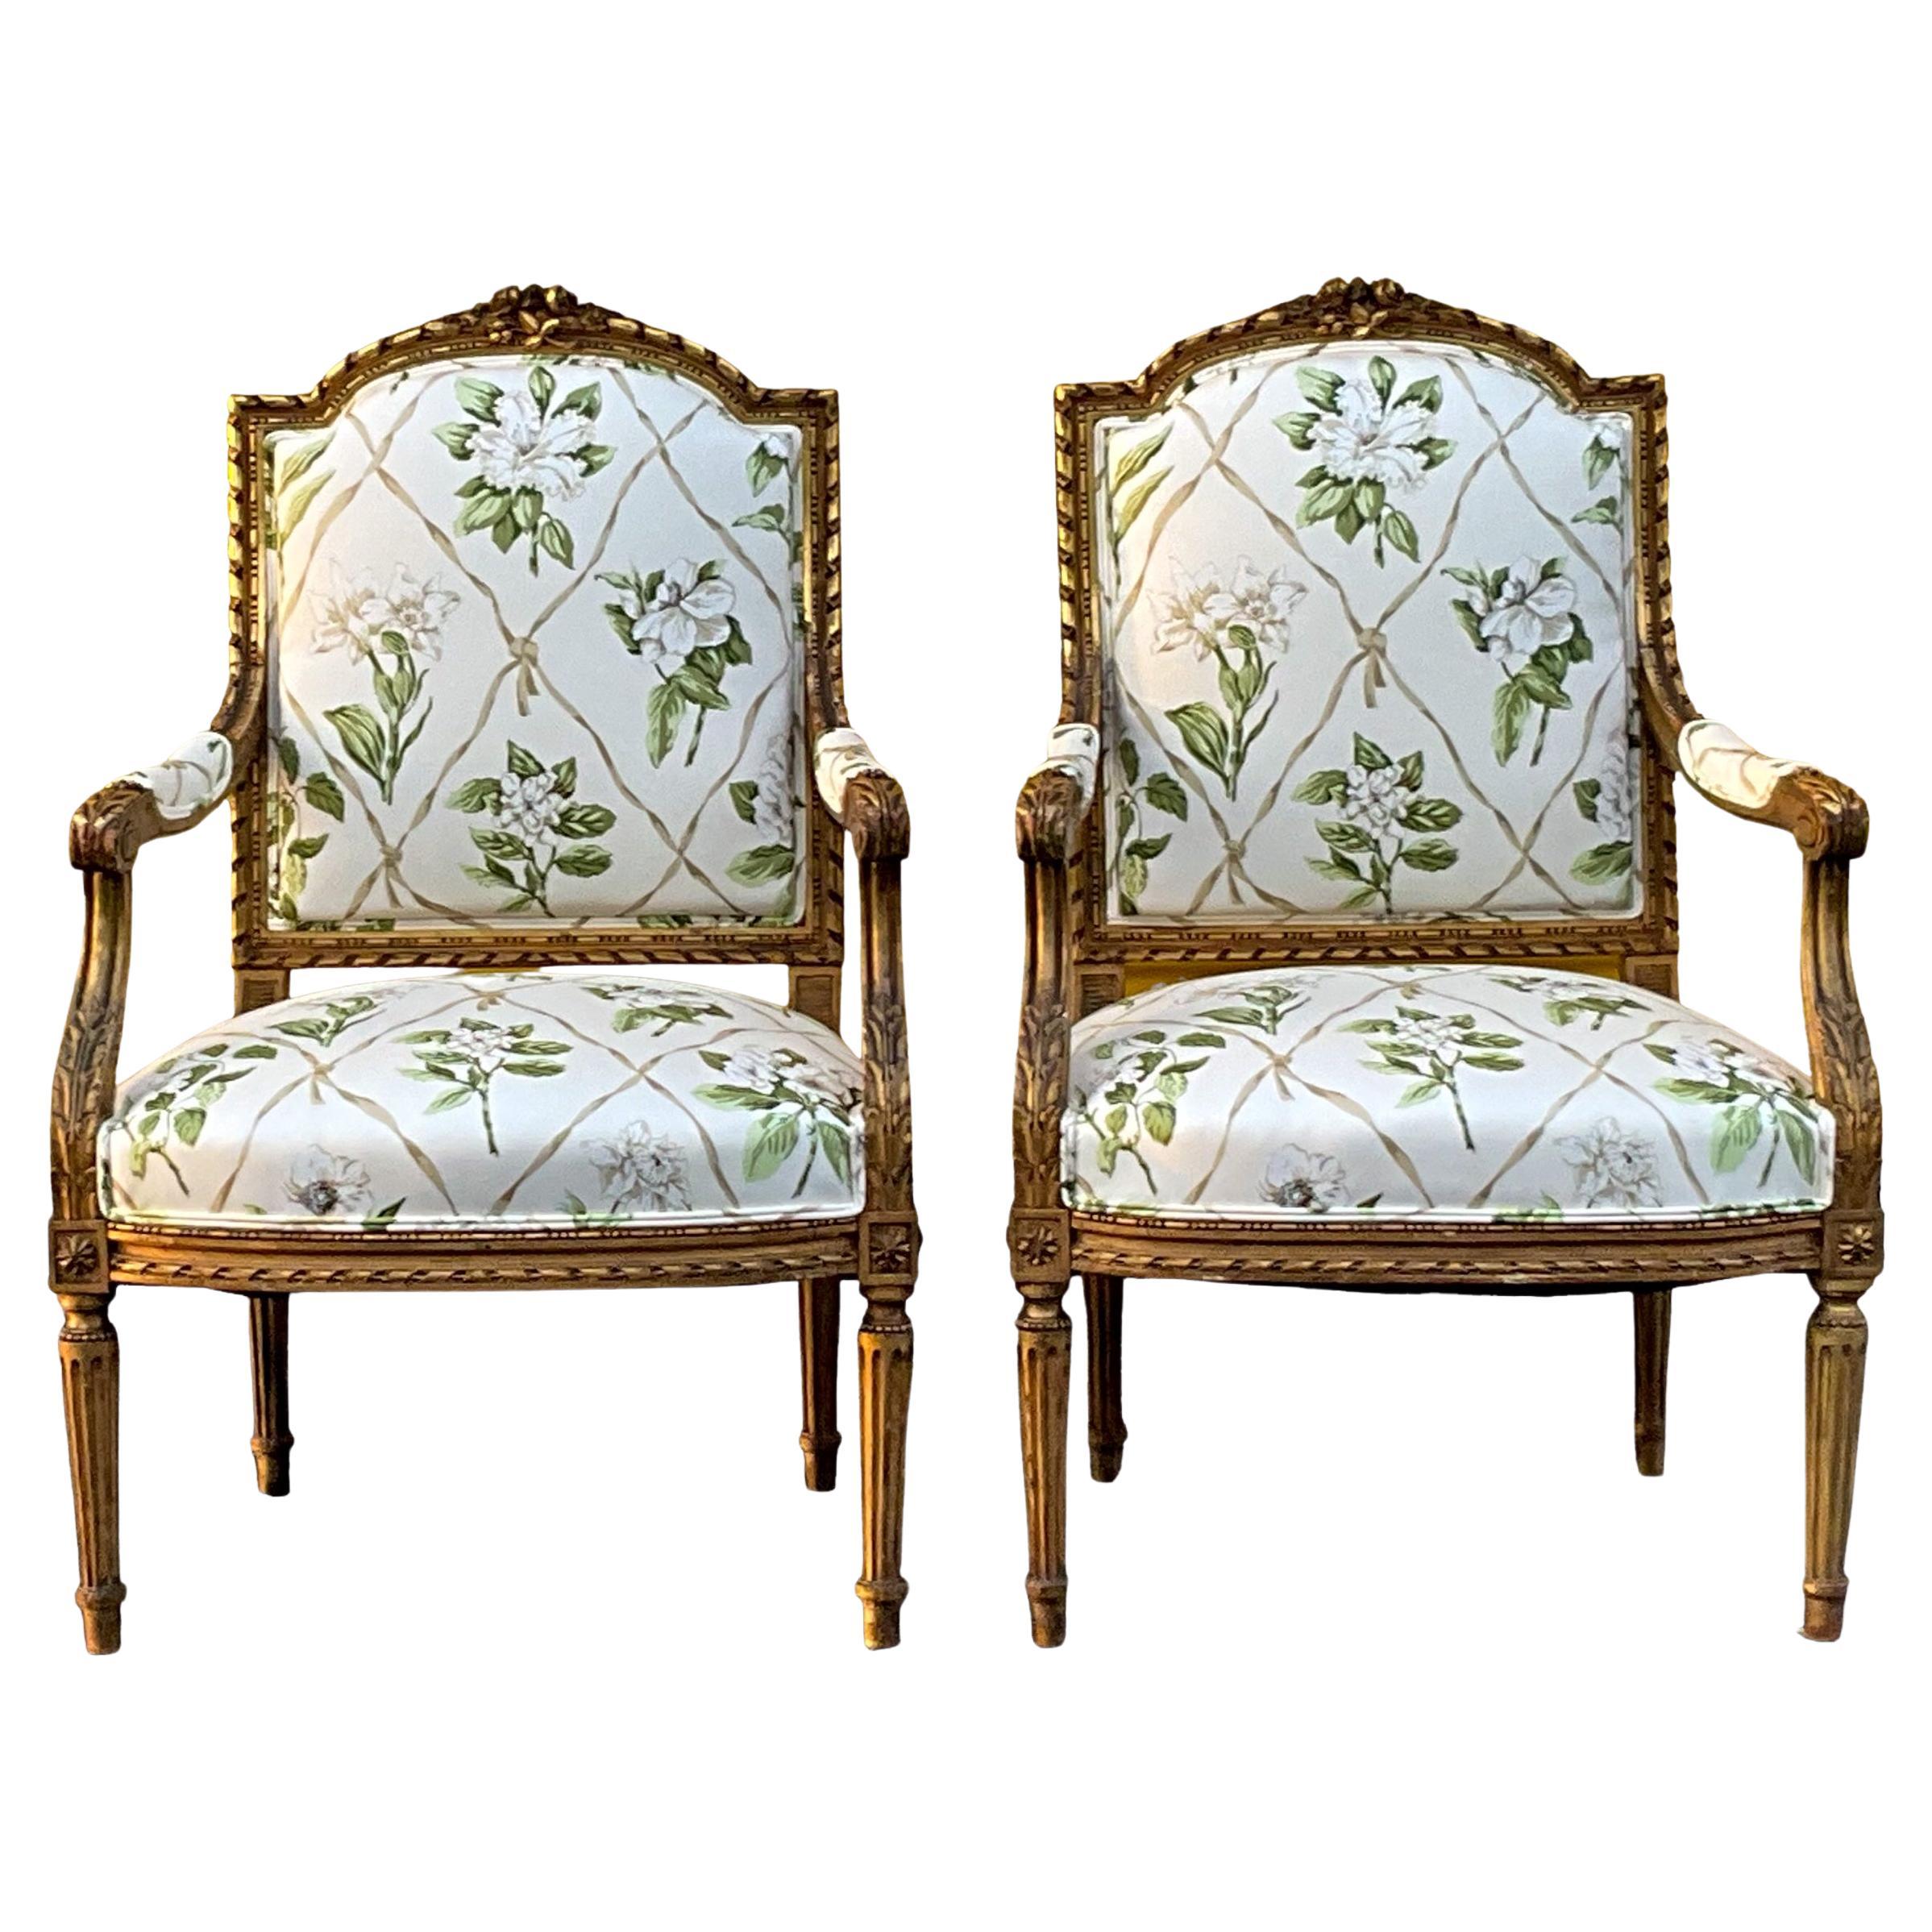 19th-C. Pair of French Louis XVI Style Carved Giltwood Bergere Chairs